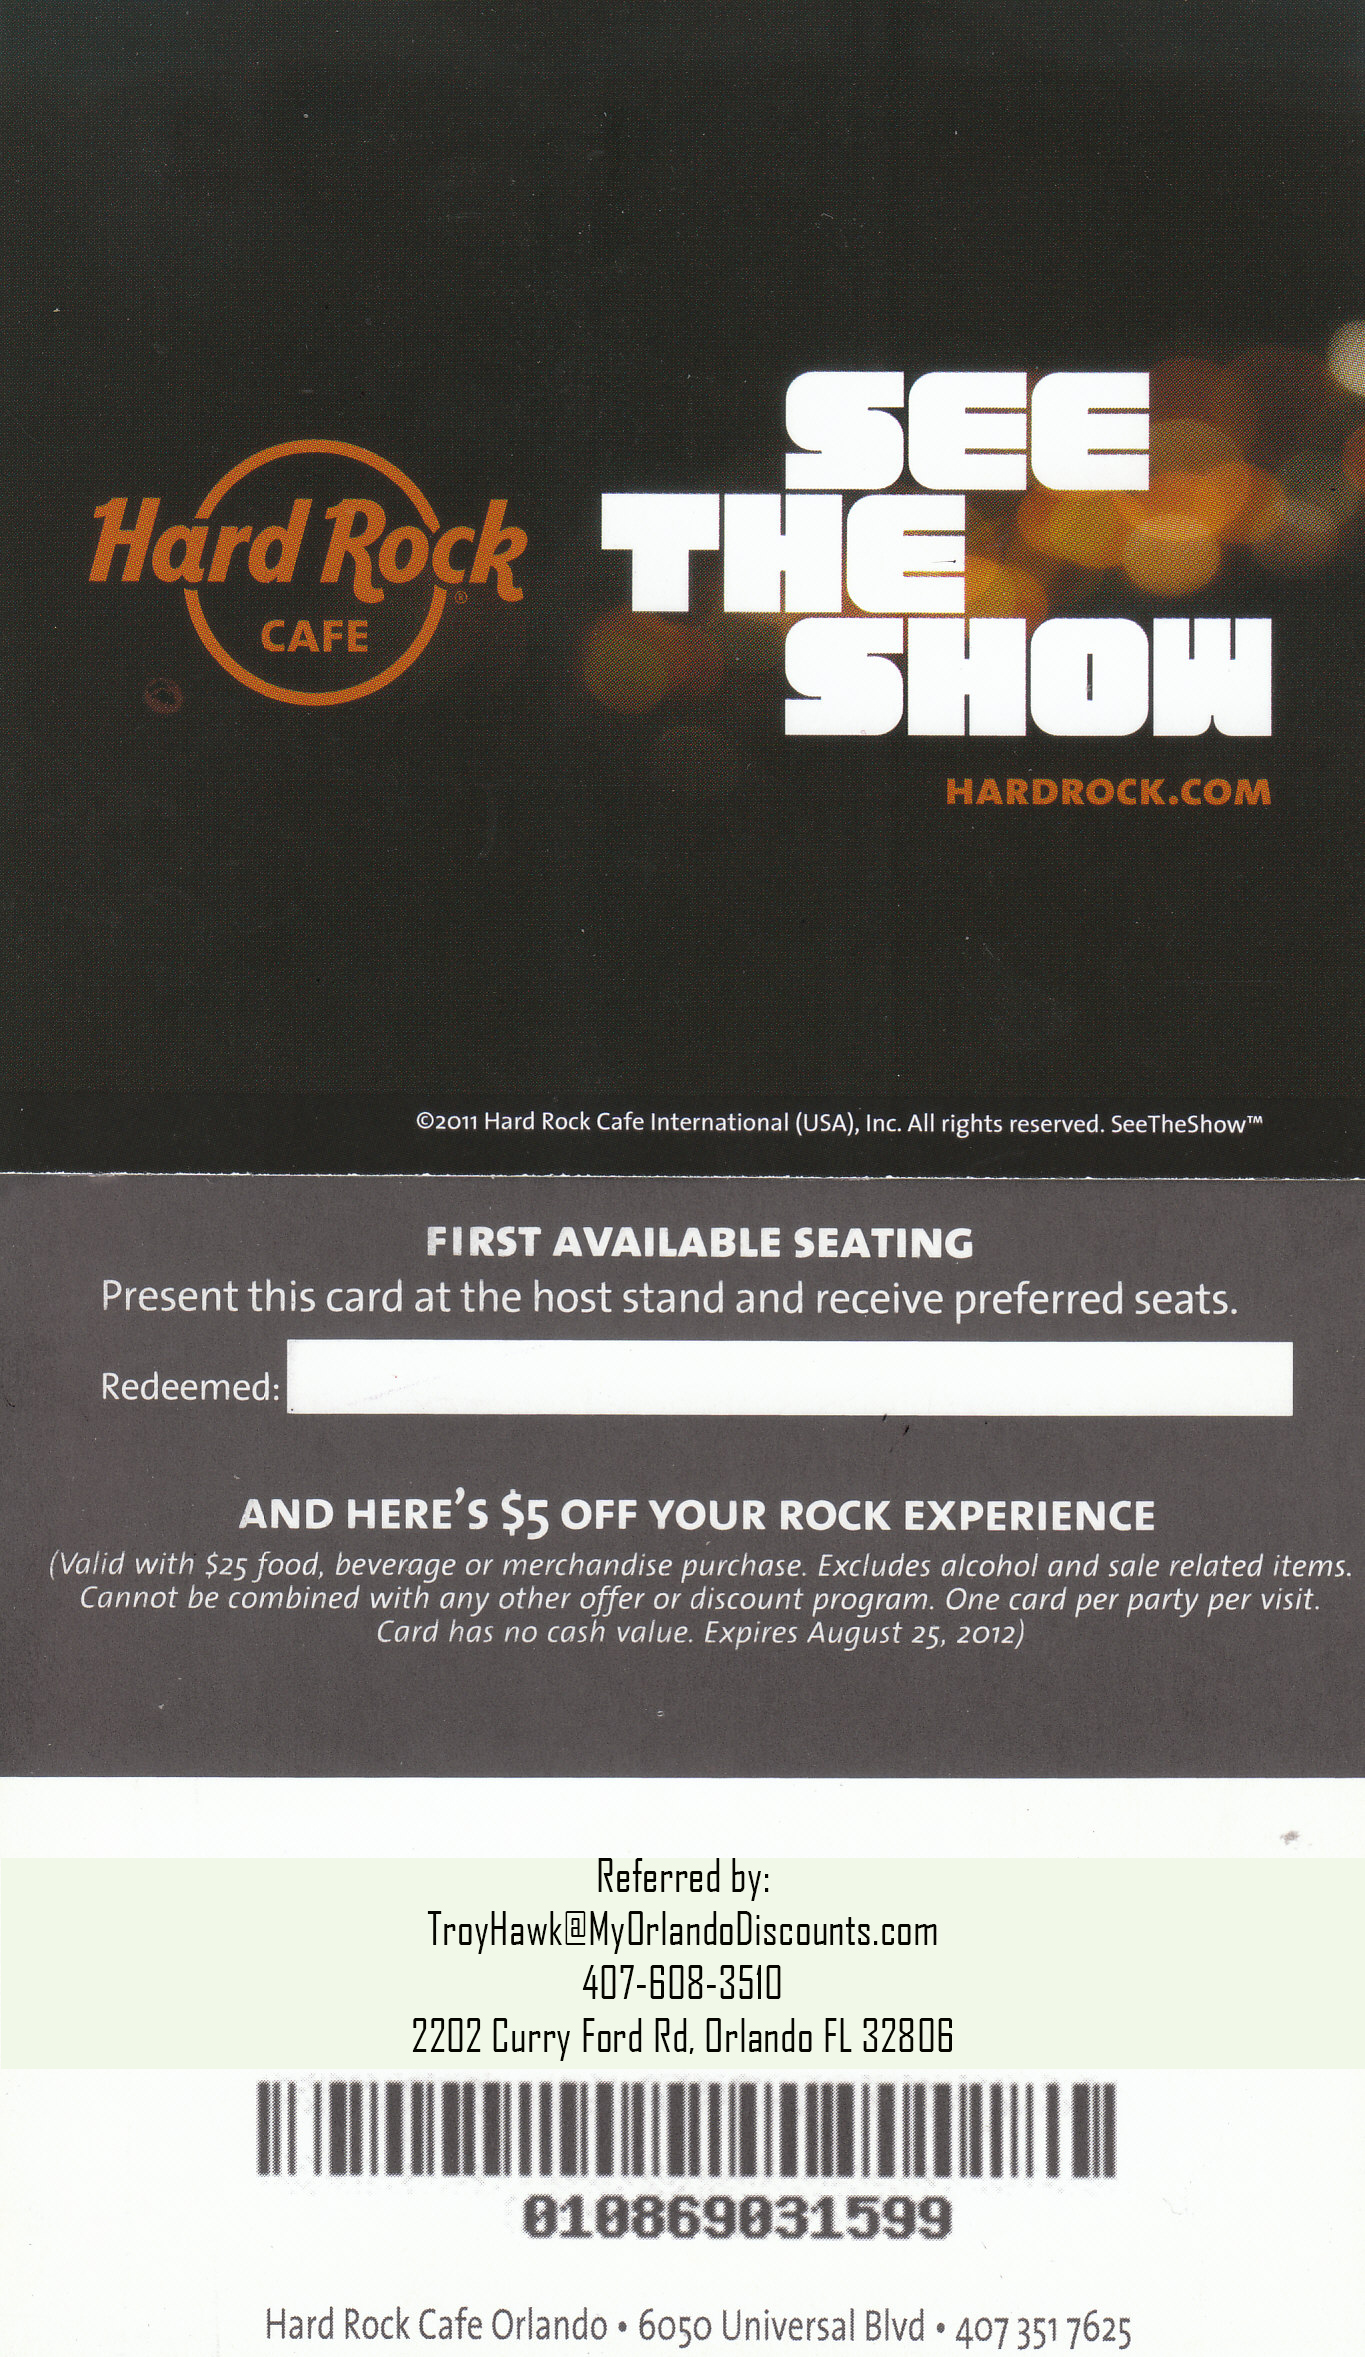 Coupon For The Hard Rock in Show Orlando